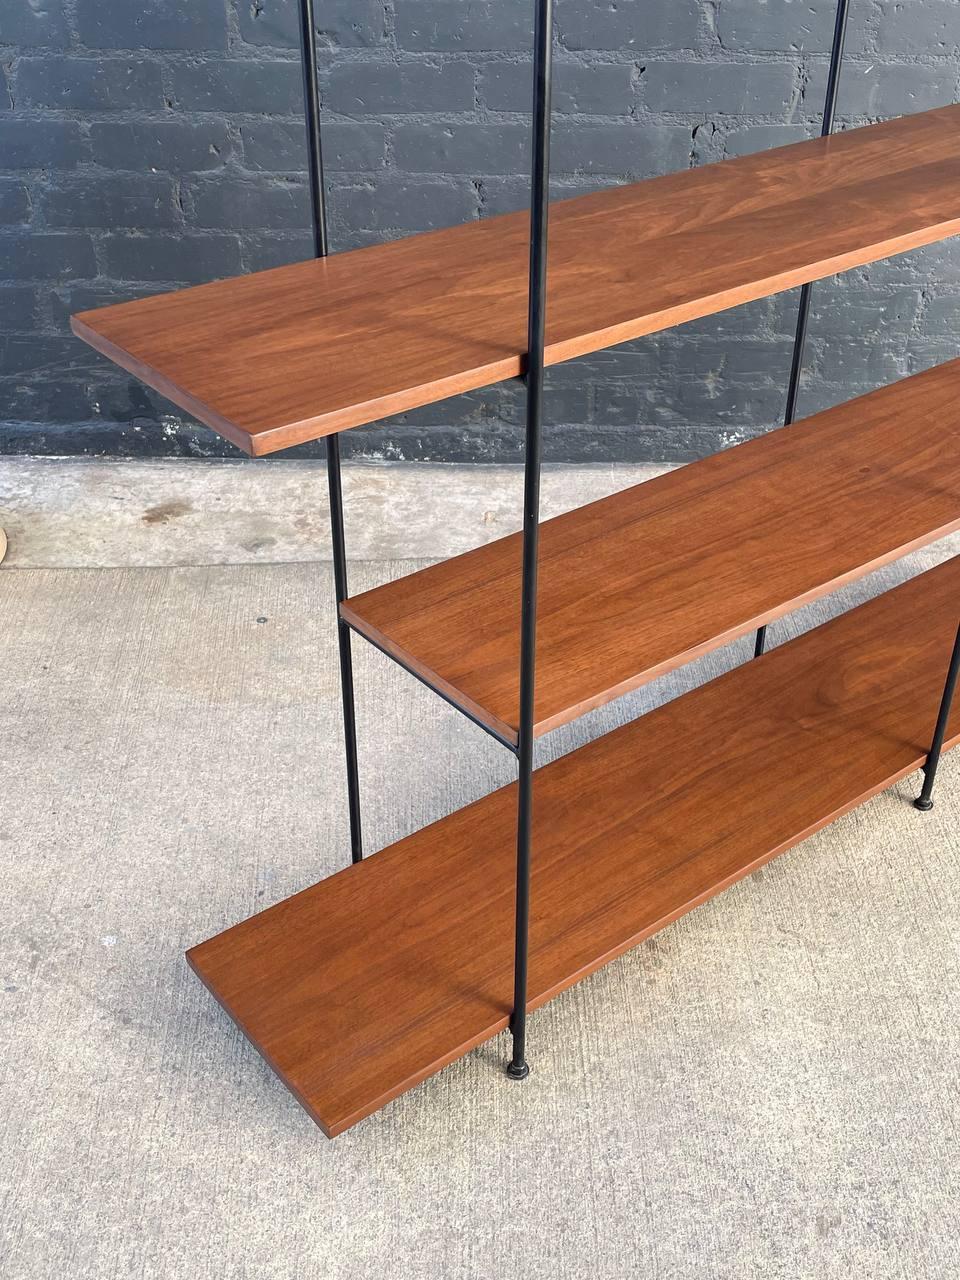 Mid-20th Century Newly Refinished - Mid-Century Modern Bookshelf by Muriel Coleman  For Sale